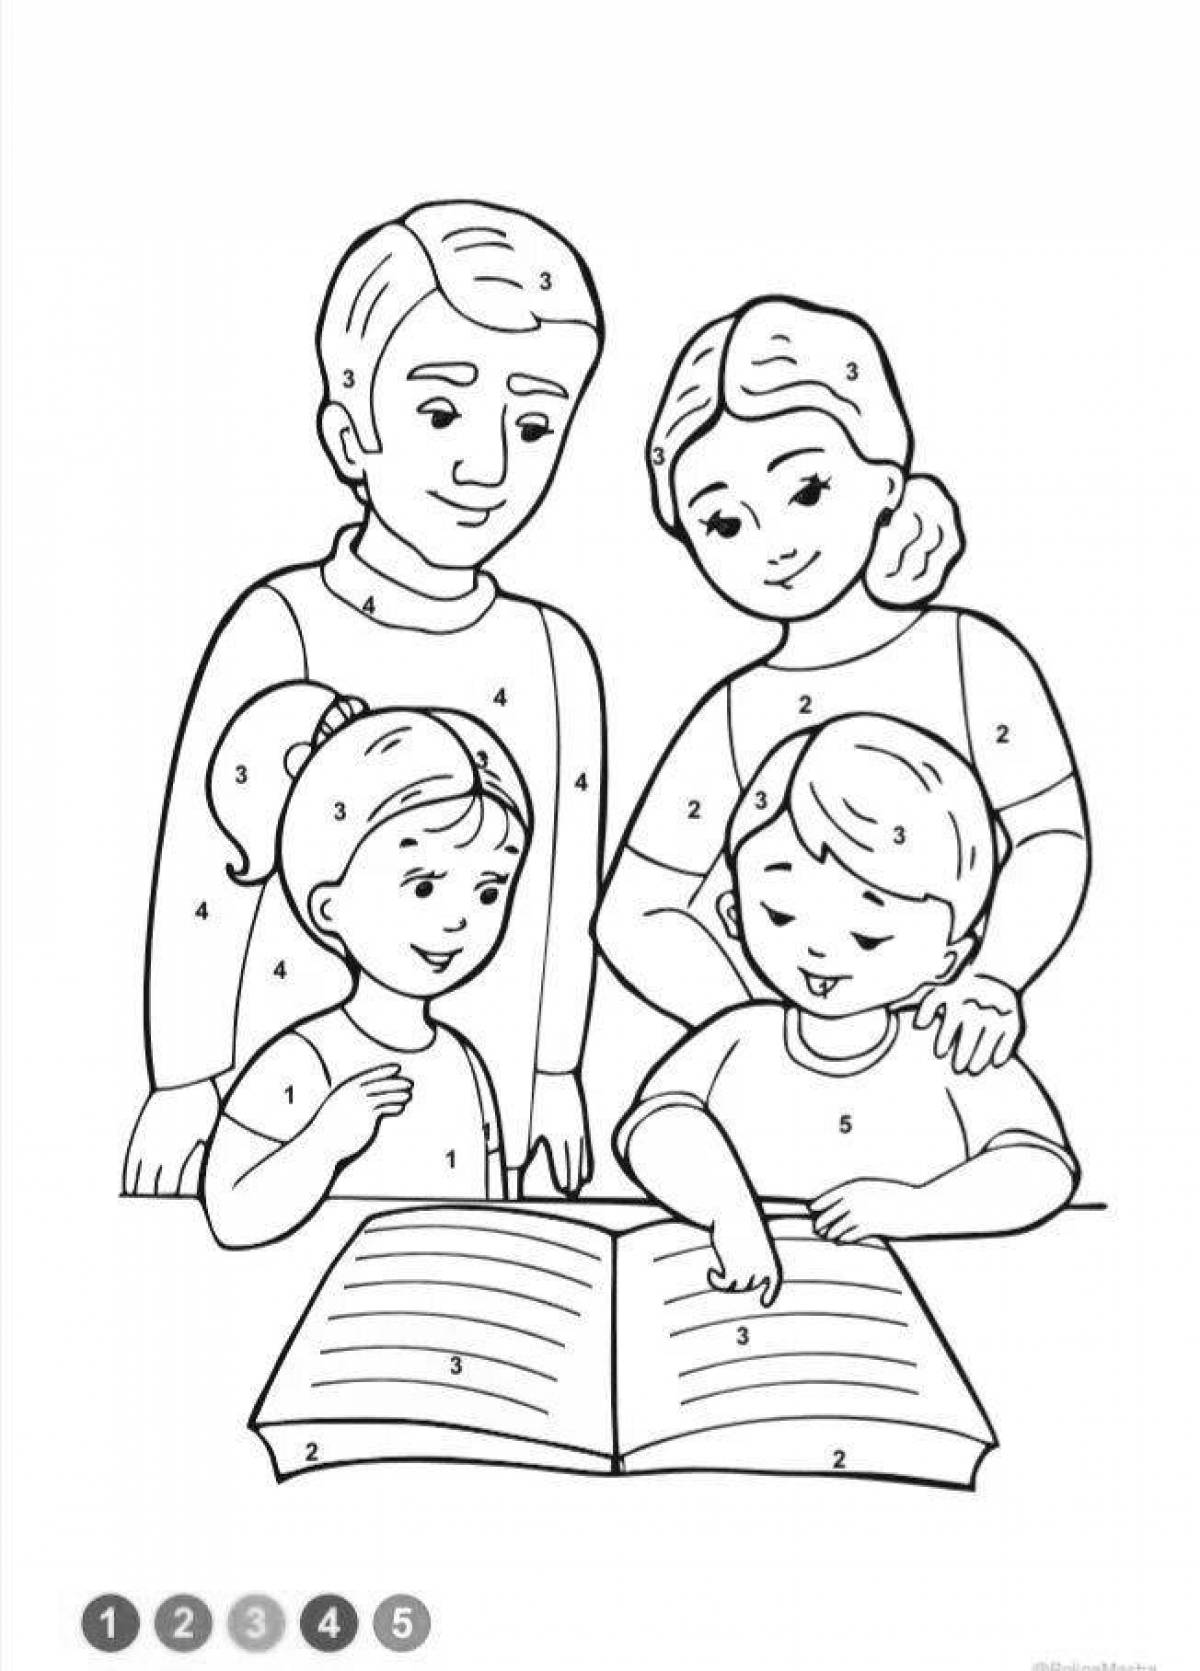 Bright family coloring picture